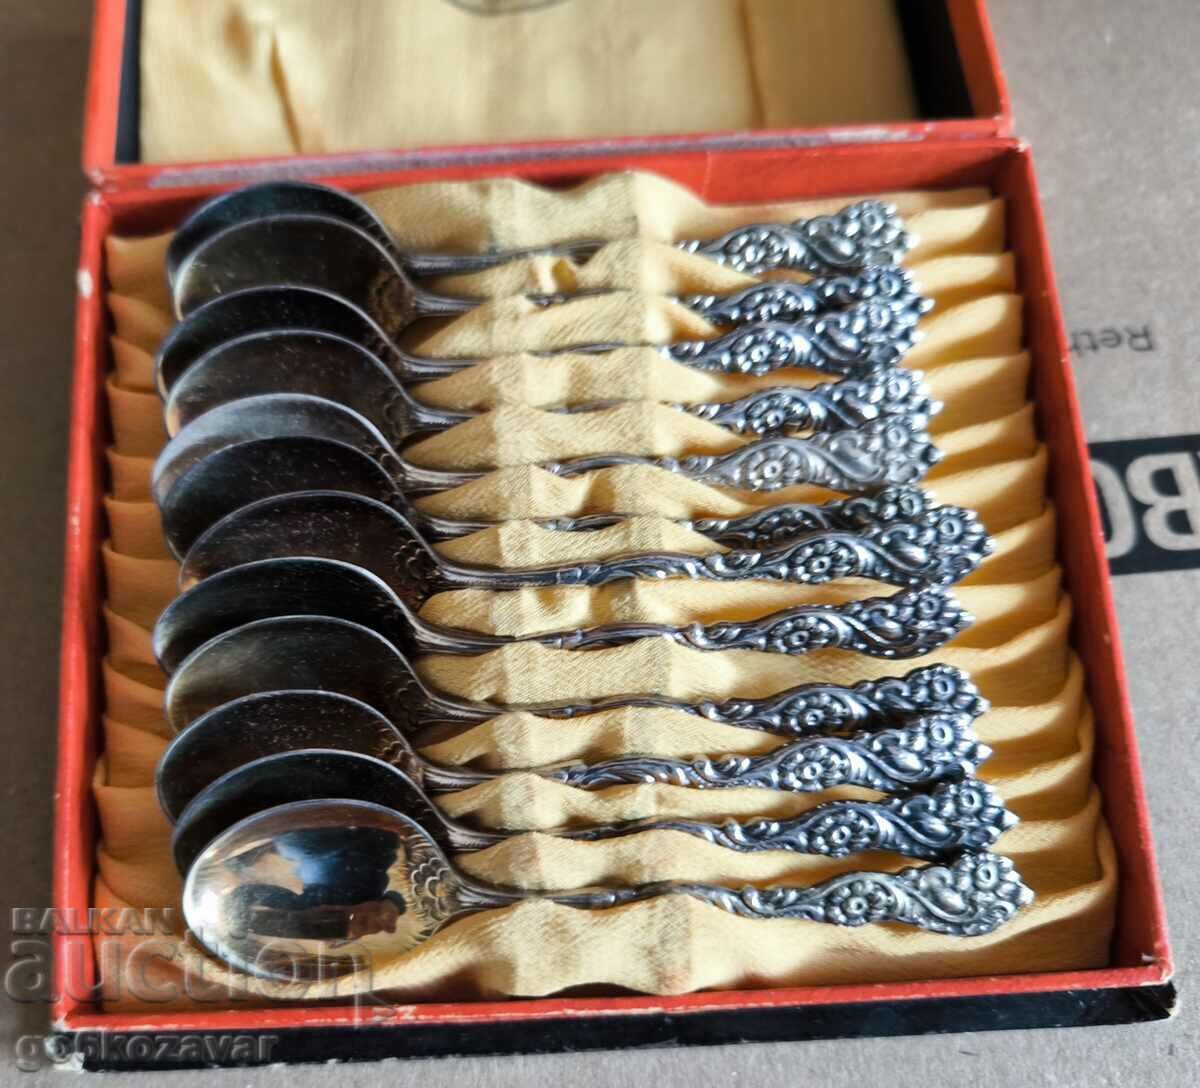 Old set of thick silver plated tea, coffee, dessert spoons!